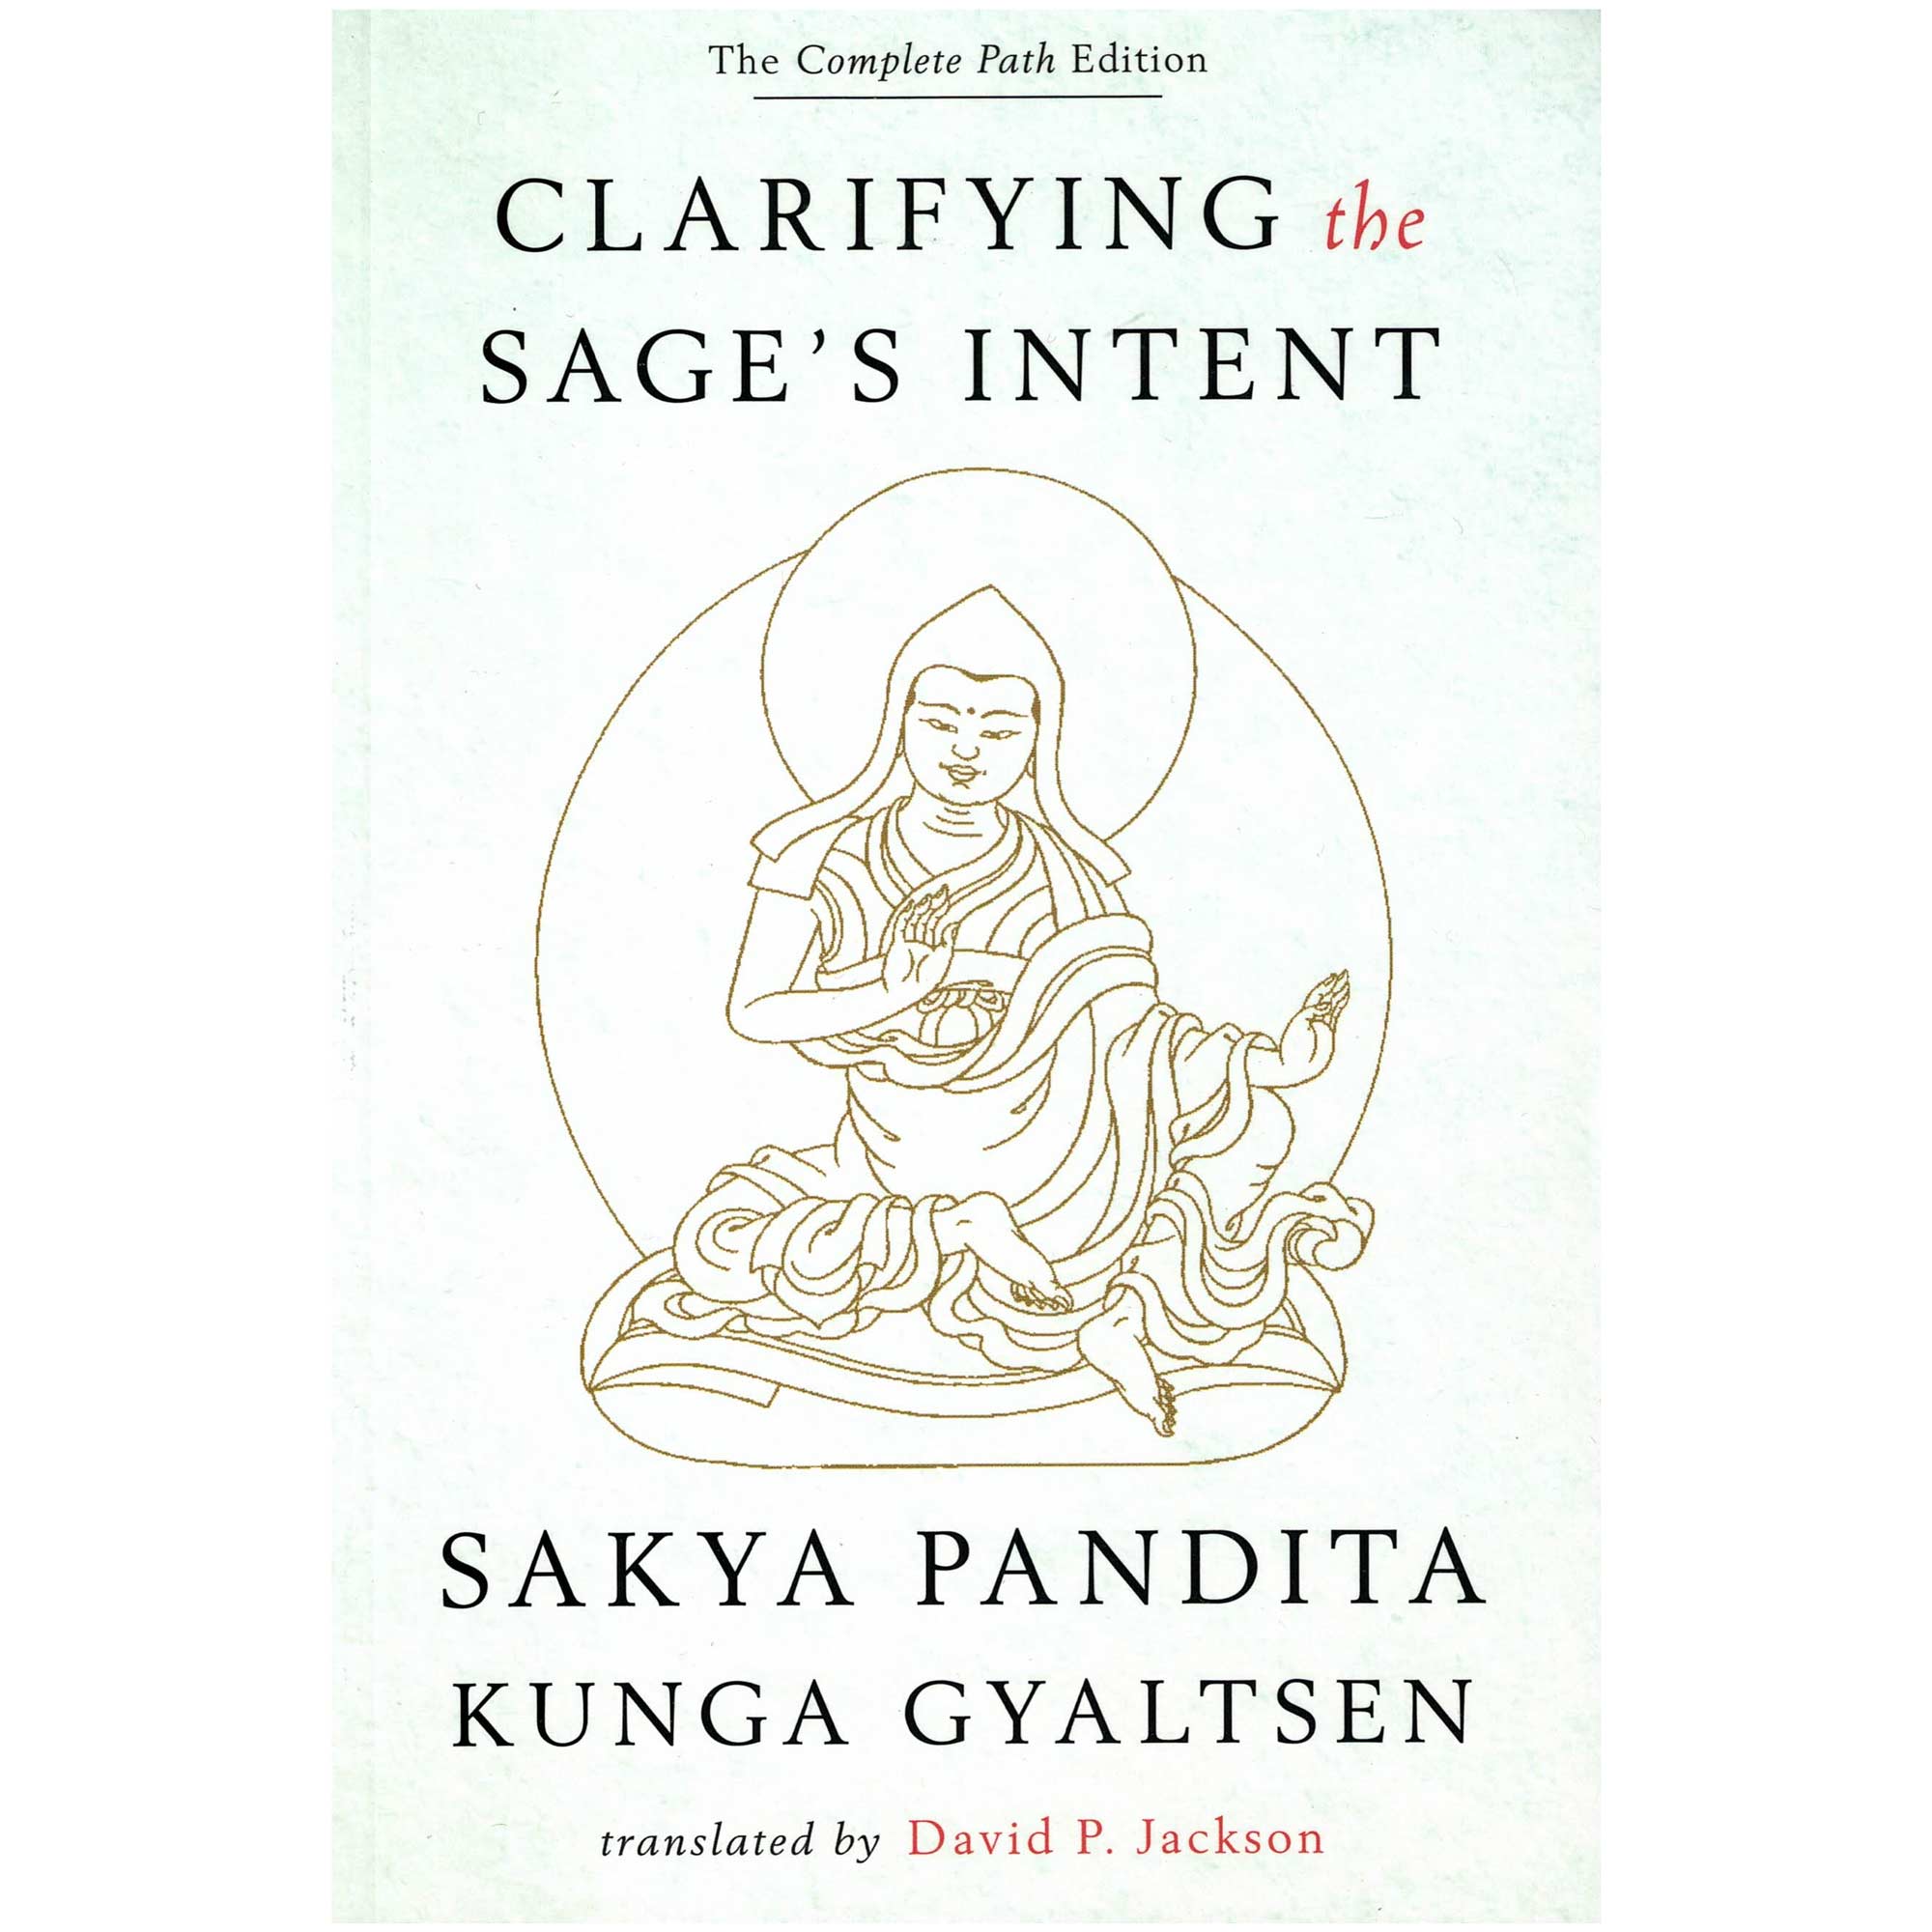 Clarifying the Sage's Intent